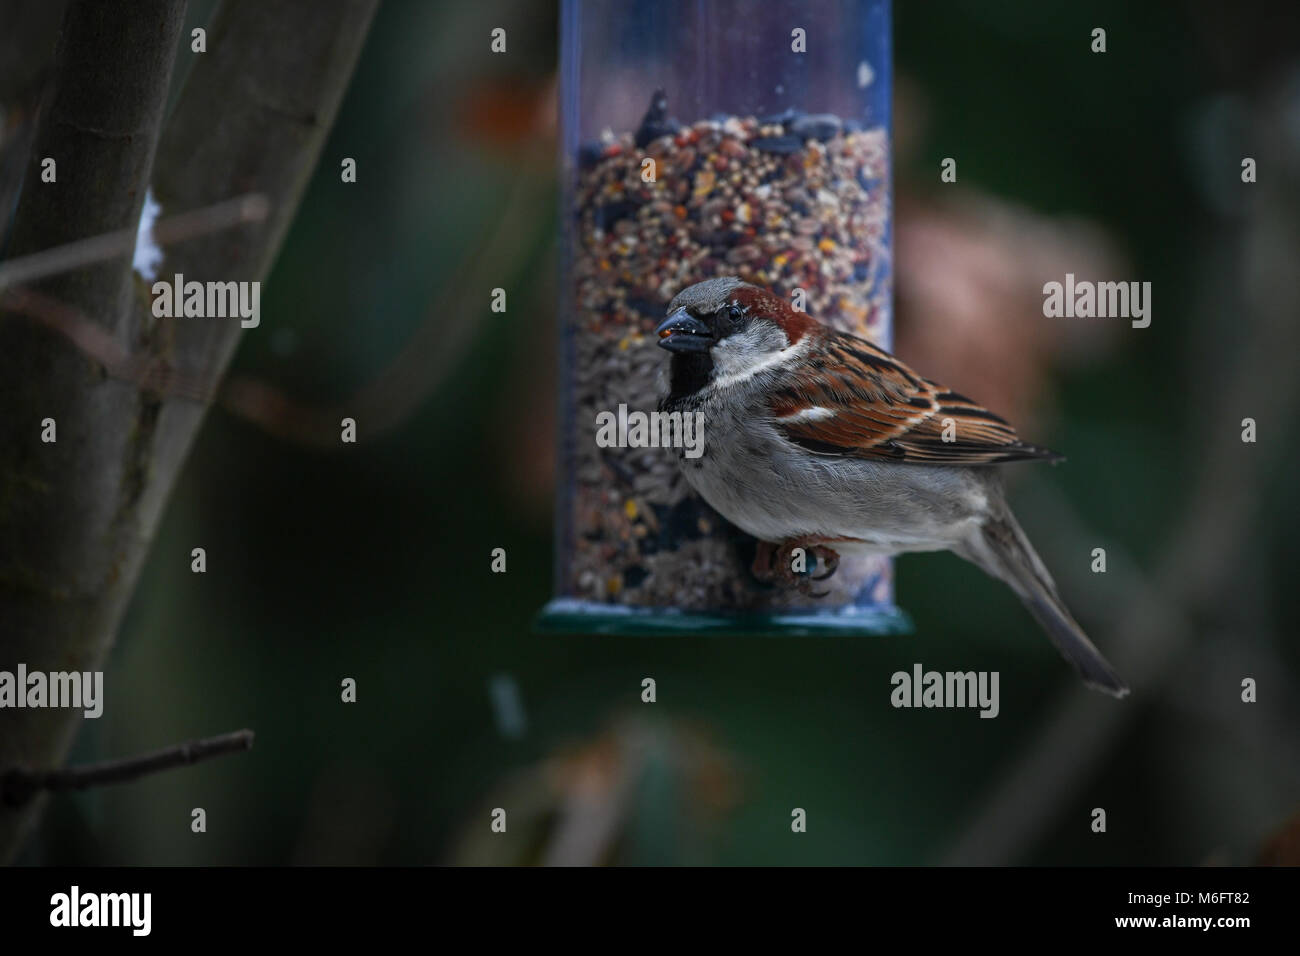 A close up of a single sparrow perched on a garden feeder eating mixed seed with seed visible in beak. Stock Photo